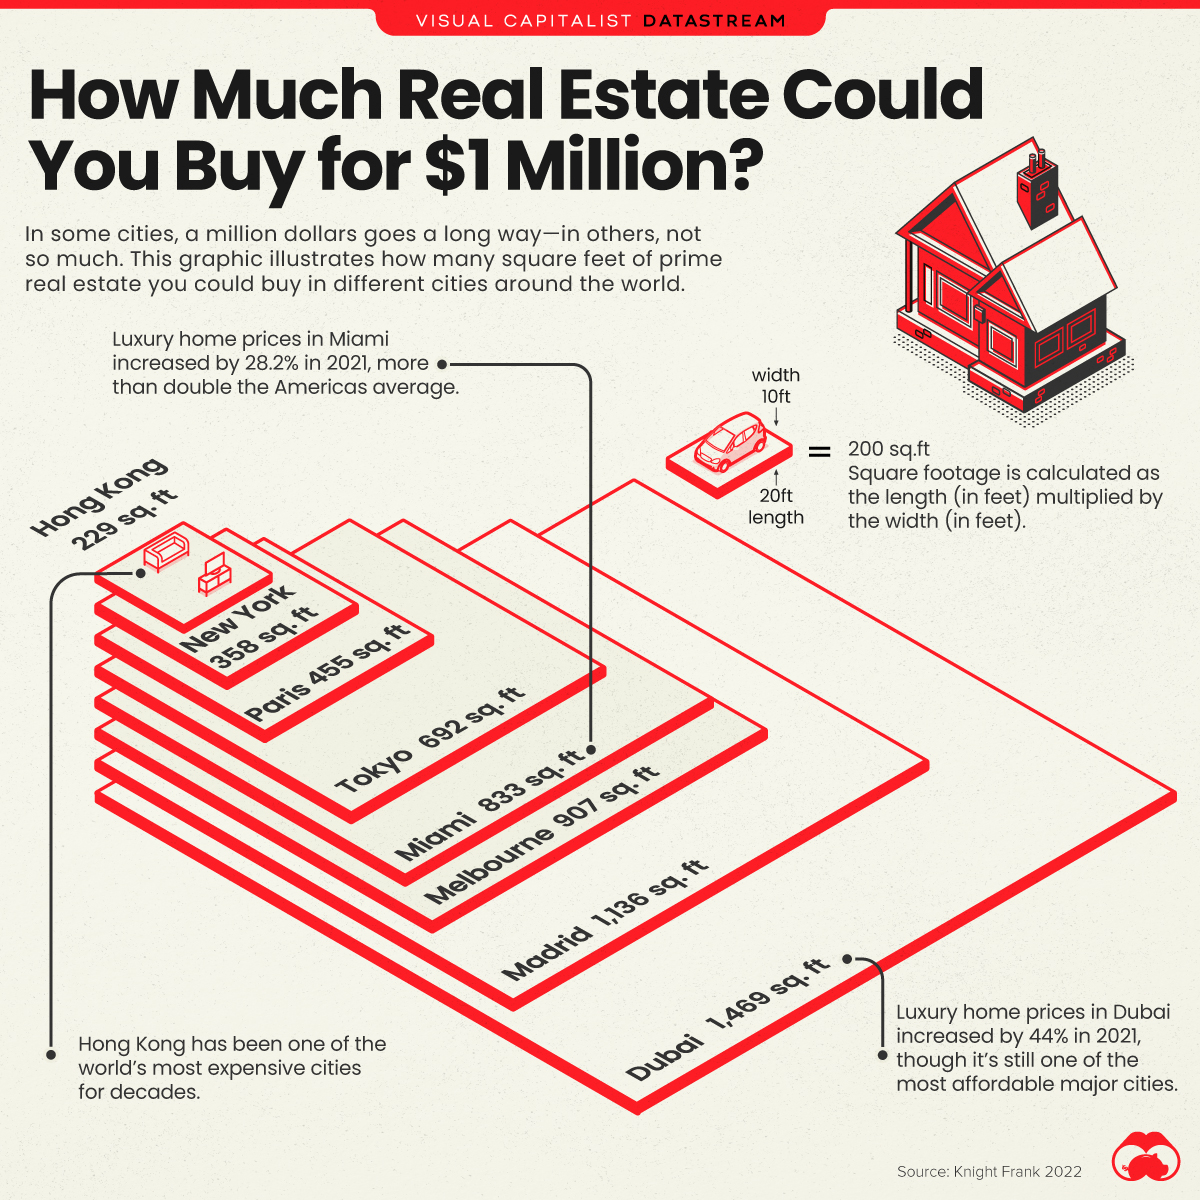 How Much Prime Real Estate Could You Buy for $1 Million?